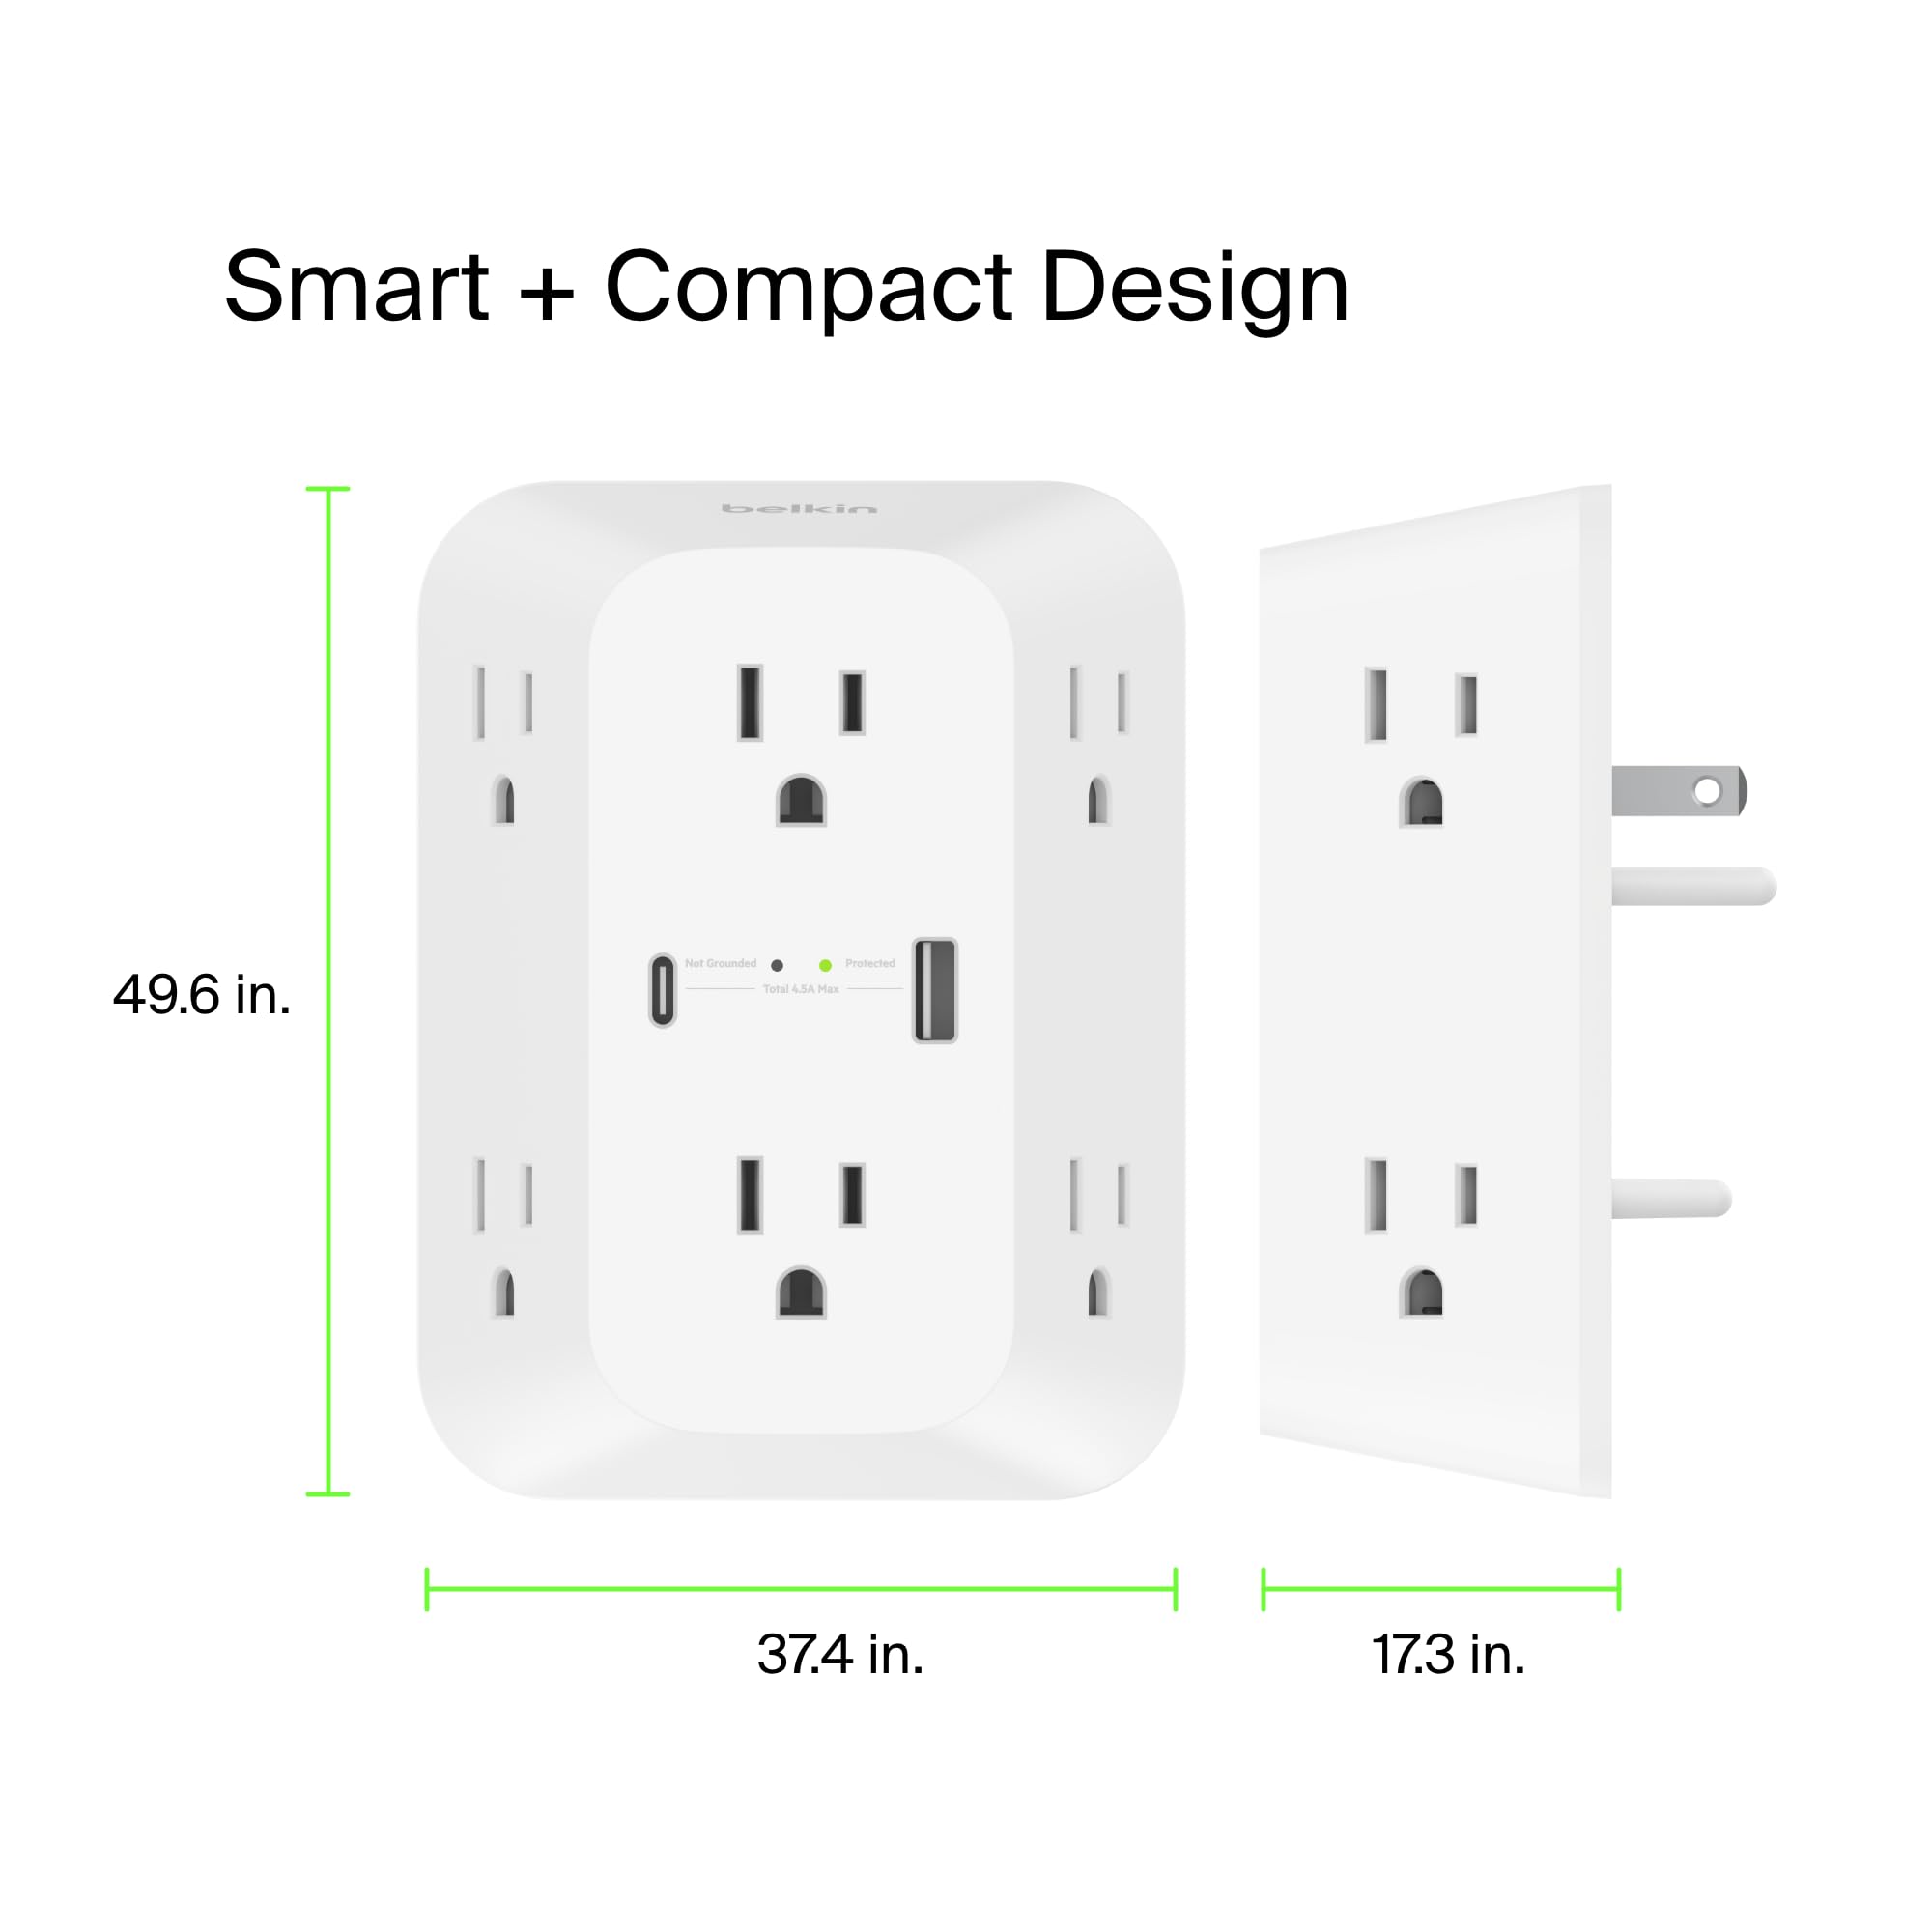 Belkin 6-Outlet Surge Protector Power Strip, Wall-Mountable with 6 AC Outlets, Overvoltage Protection, LED Indicator - USB-C Port & USB-A Port w/USB-C PD Fast Charging - 1680 Joules of Protection